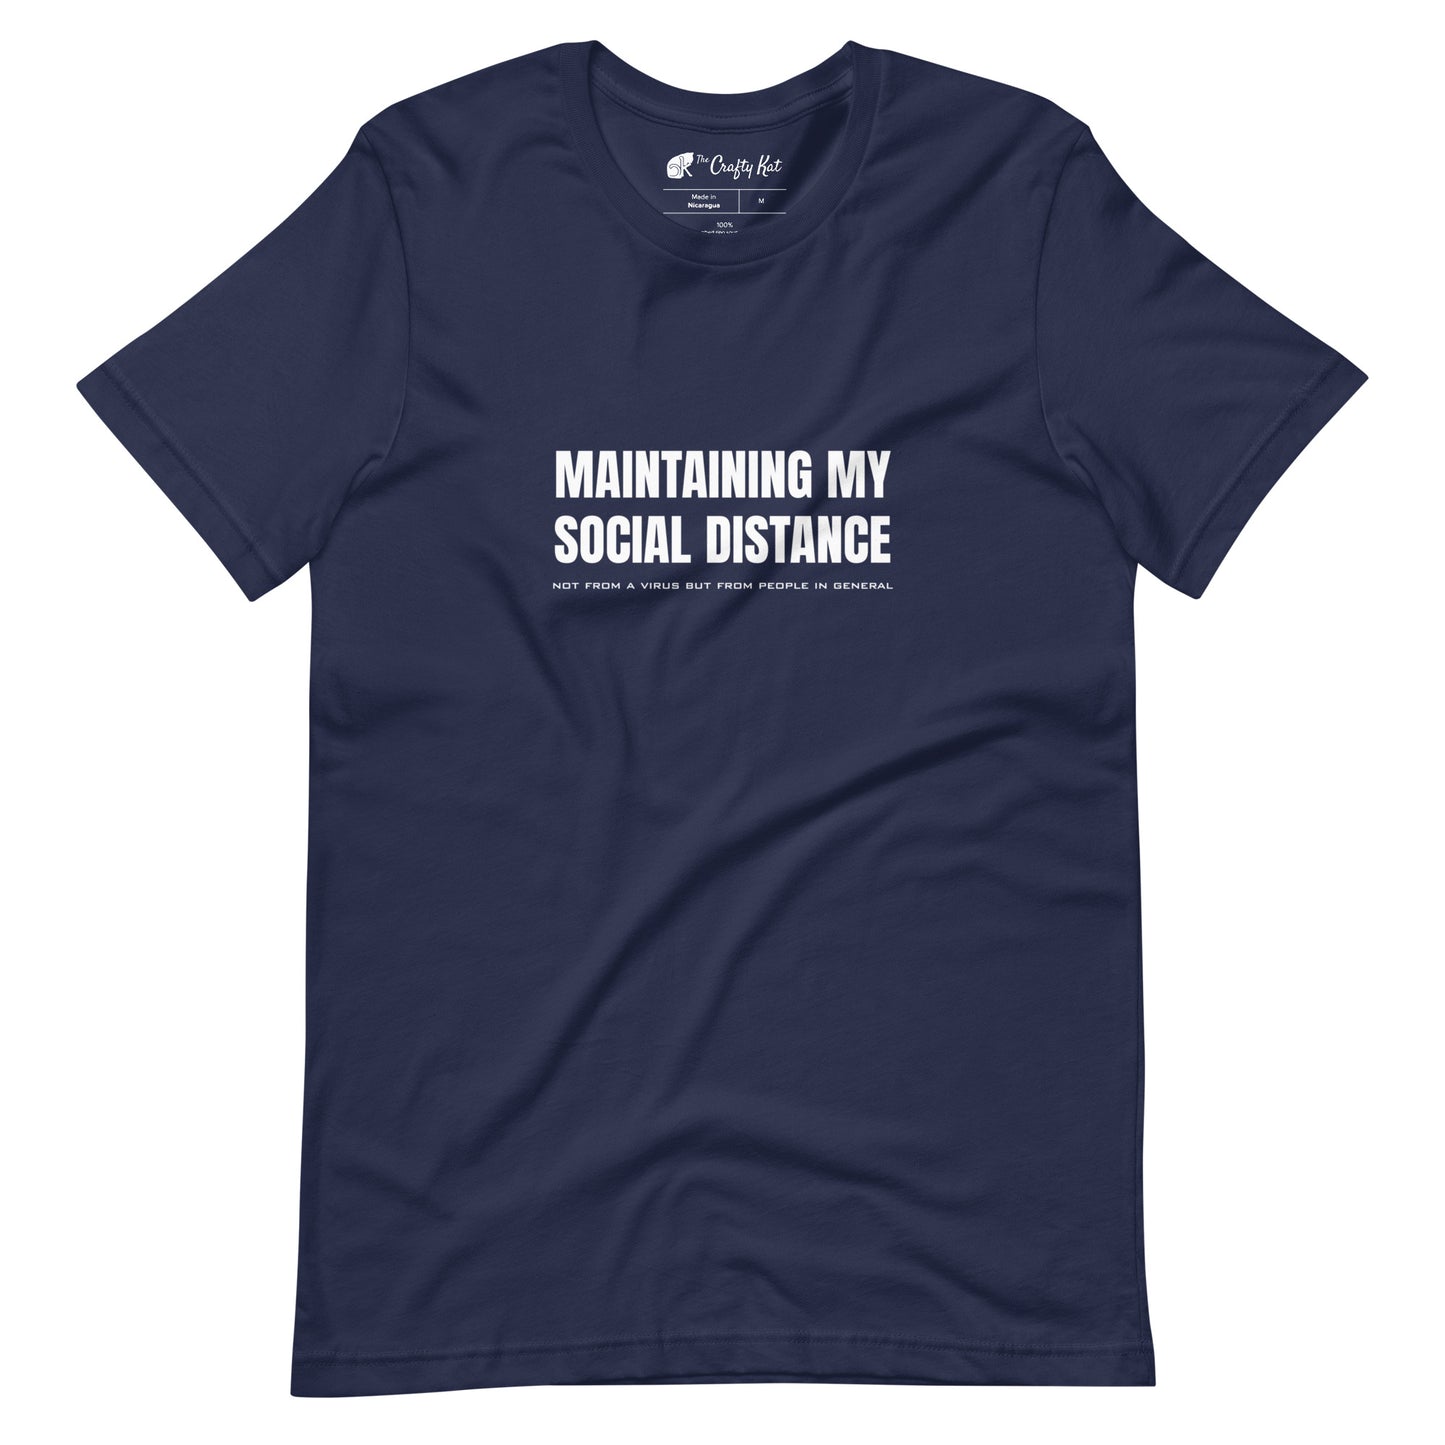 Navy t-shirt with white graphic: "MAINTAINING MY SOCIAL DISTANCE not from a virus but from people in general"